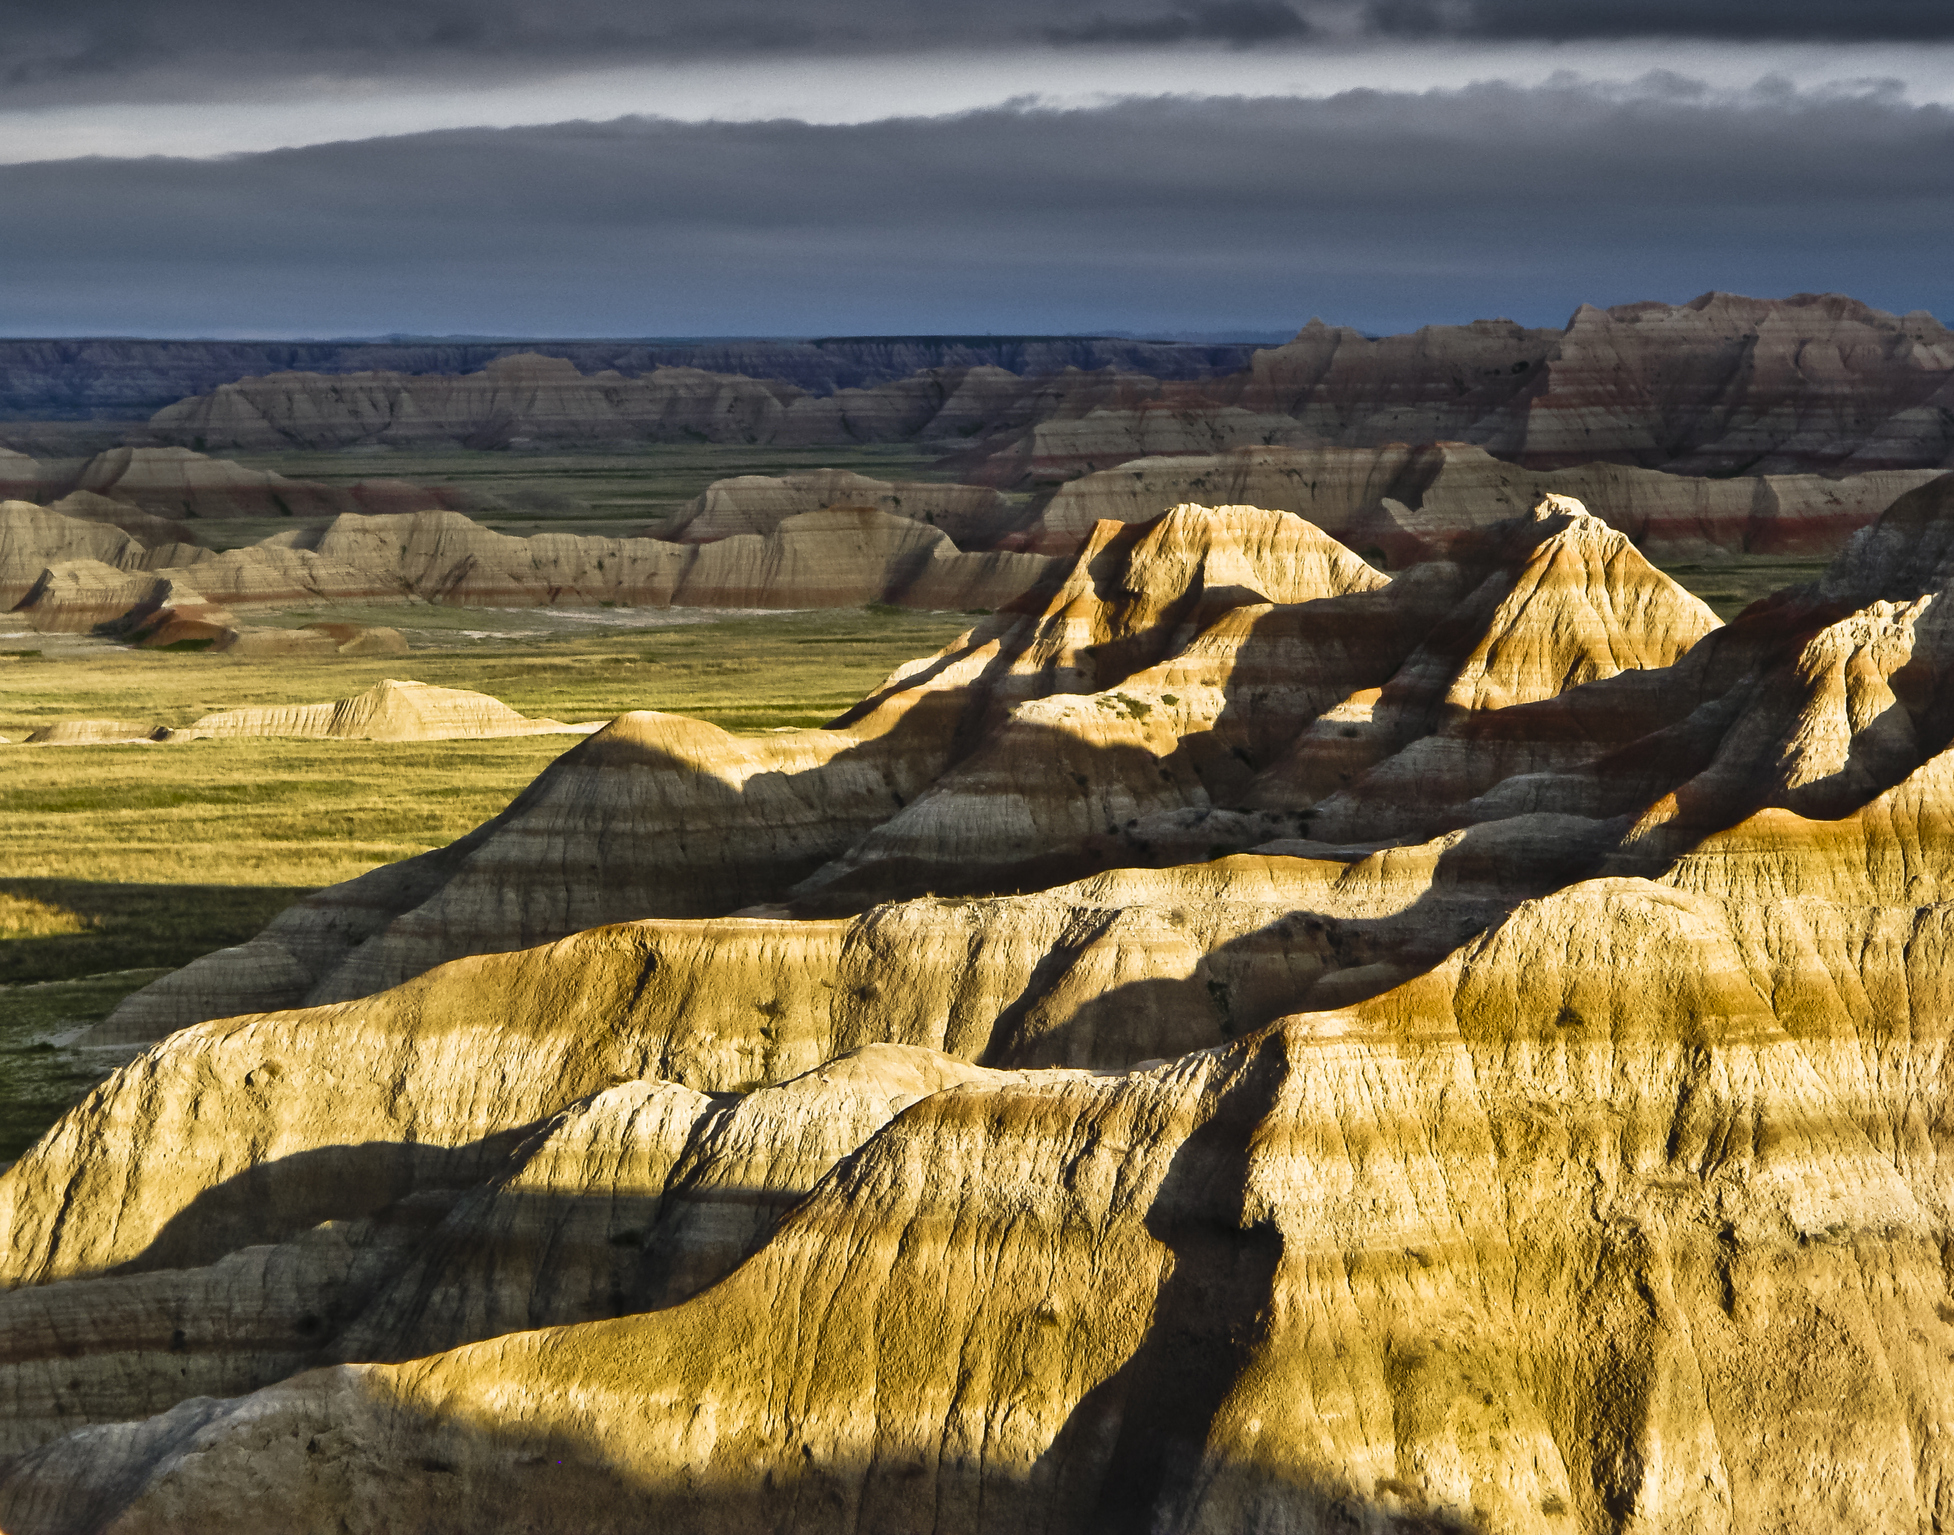 Distant clouds made for interesting background against a lightened foreground.  Morning sunrise shadows added a little extra to the mood.  Badlands National Park. Finalist in The Nature Conservancy's 2010, 5th Annual Digital Photo Contest (Getty)